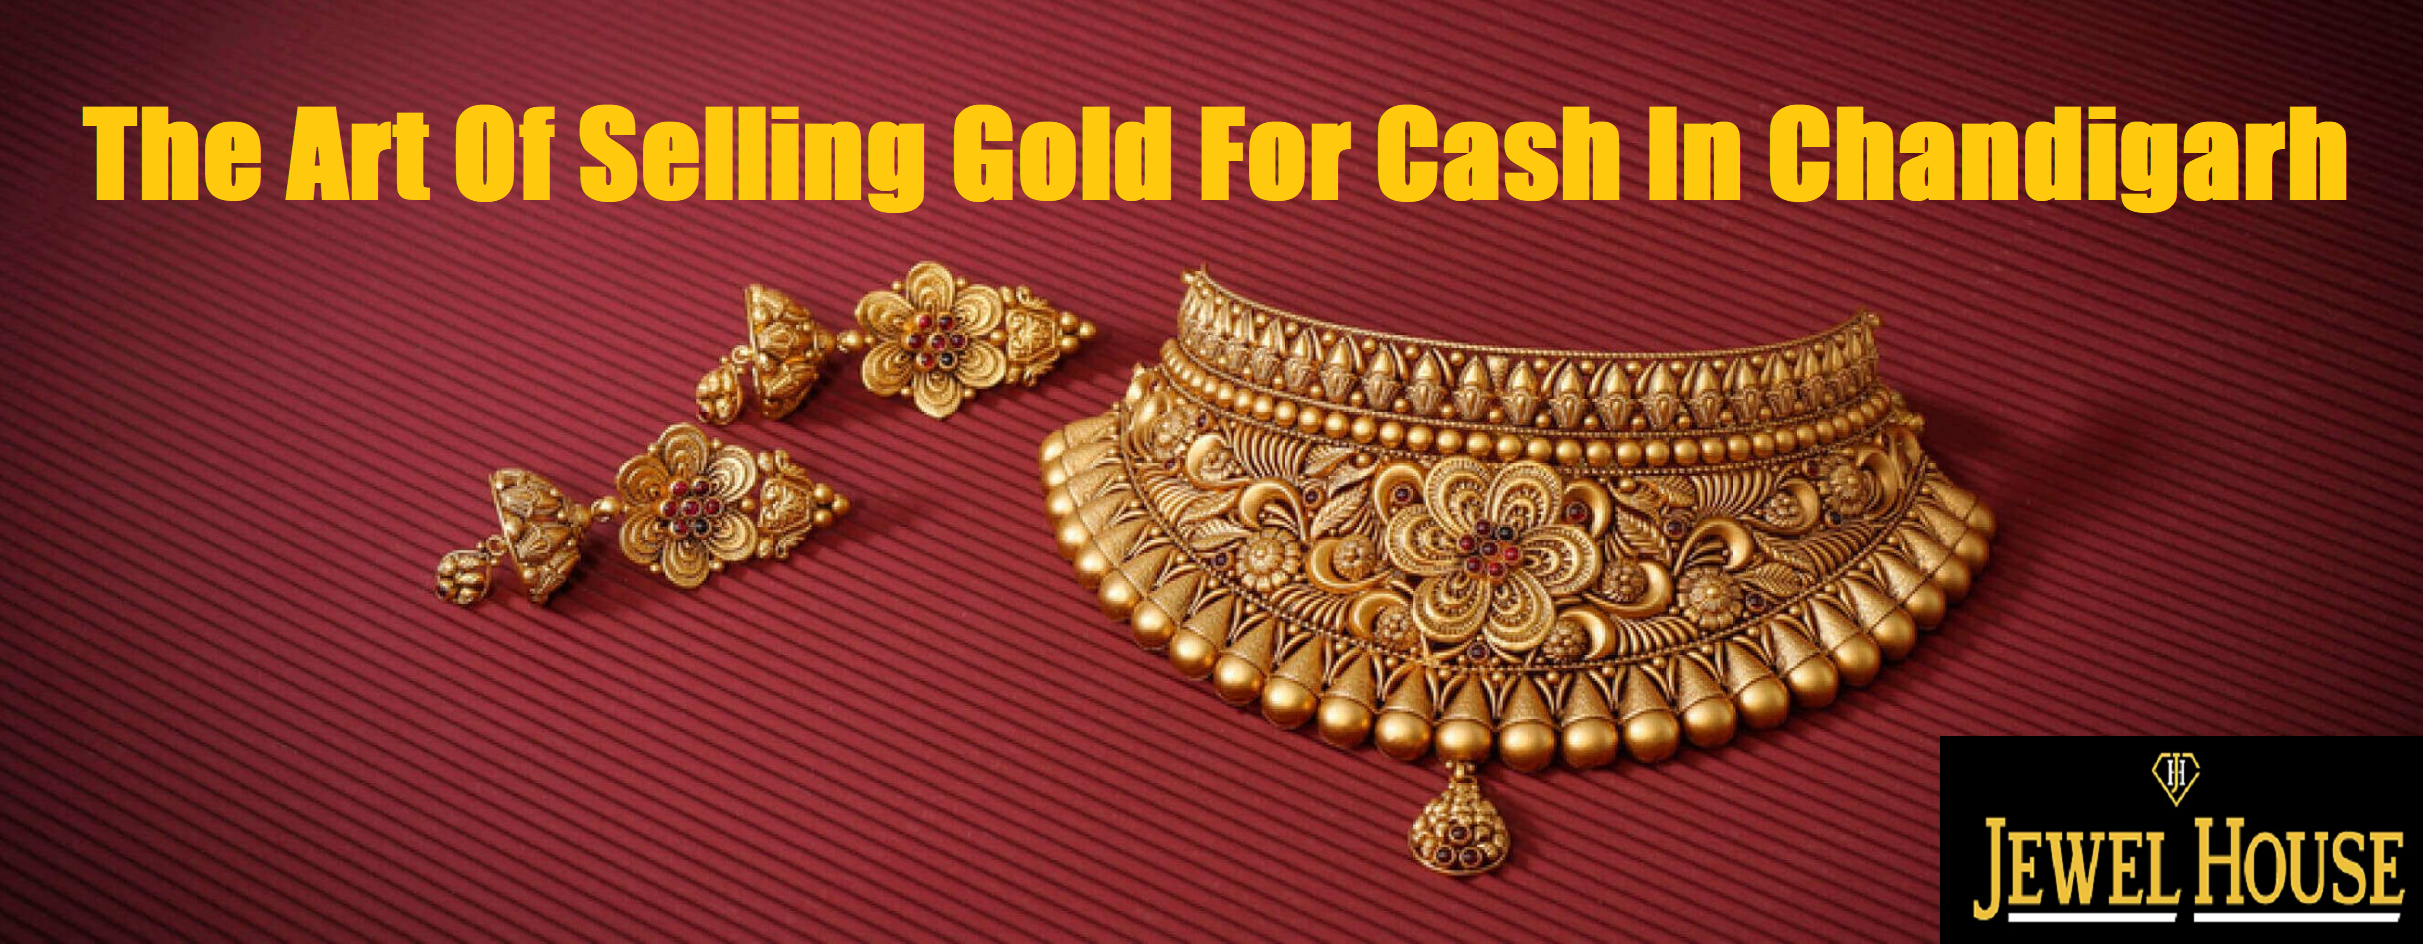 The Art Of Selling Gold For Cash In Chandigarh